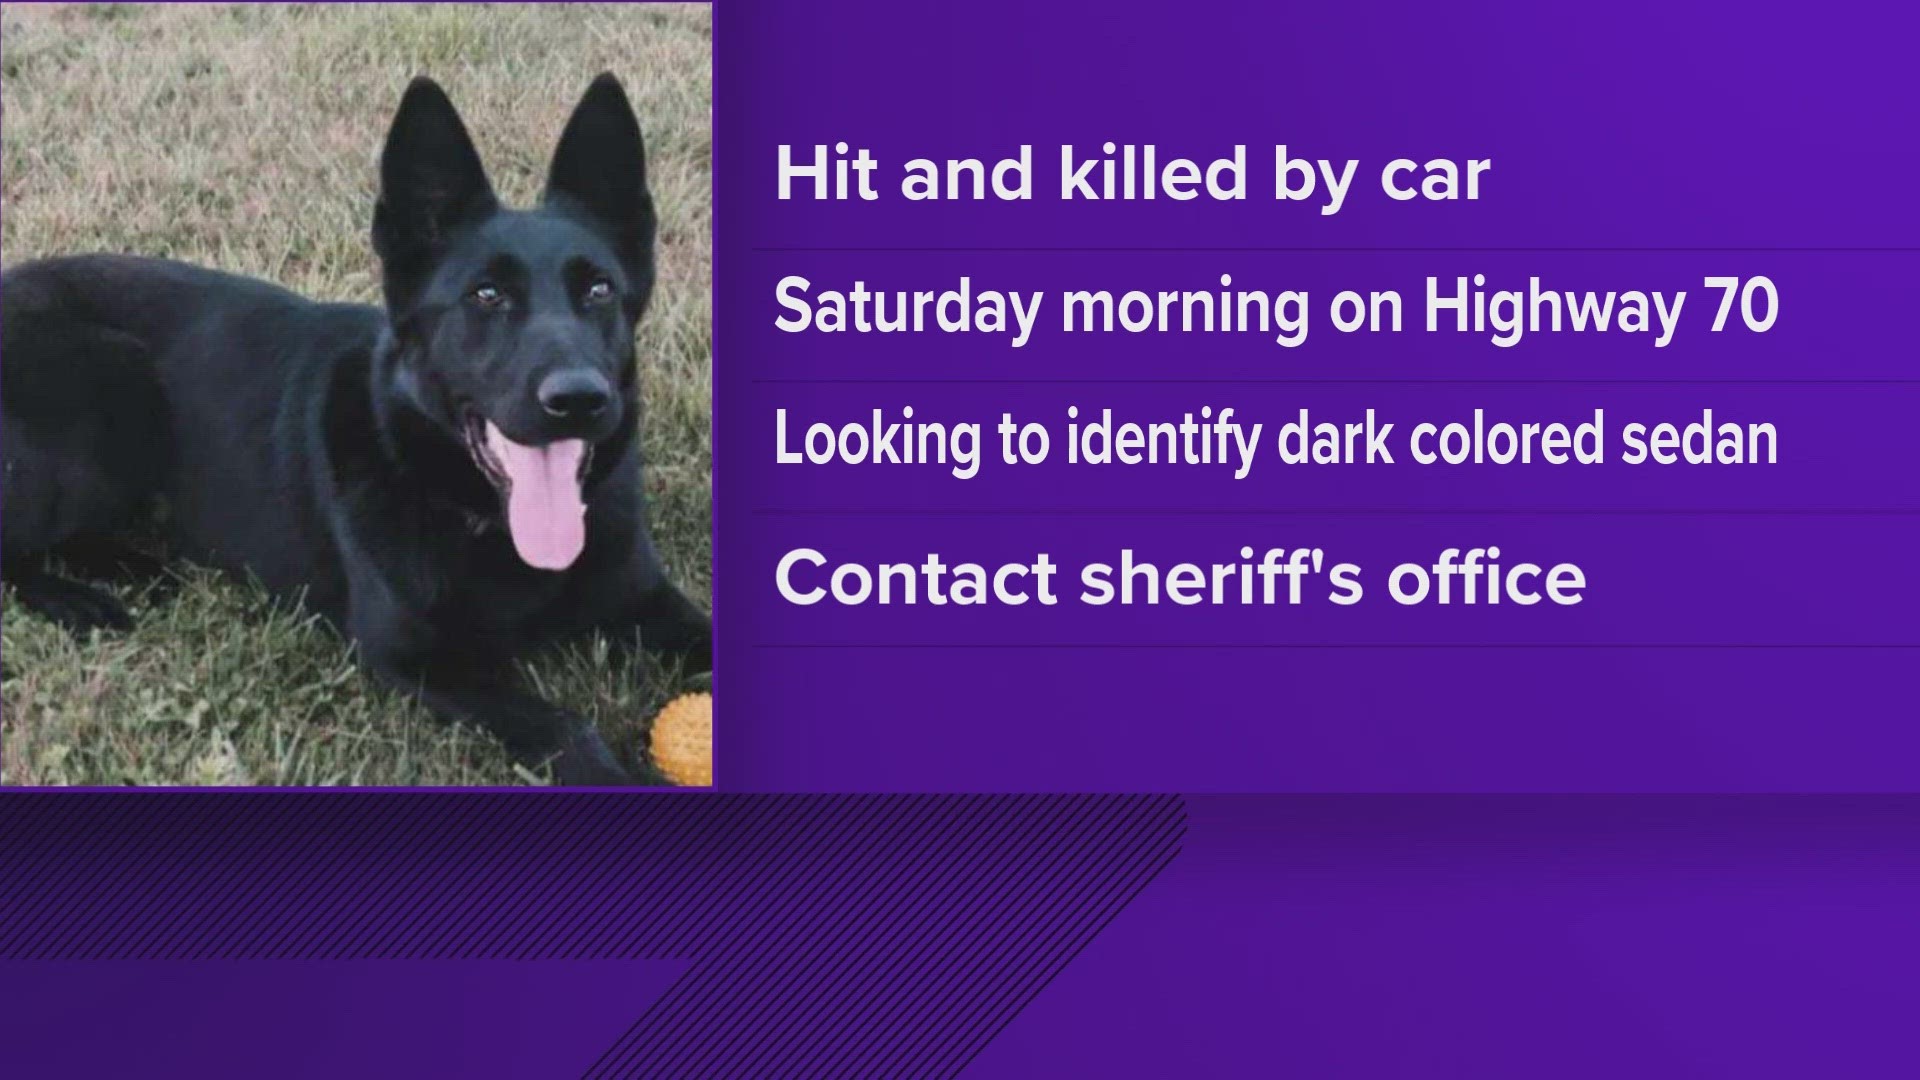 The K-9 was named Shadow, and the Cumberland County Sheriff's Office said the dog was pronounced dead at the scene.